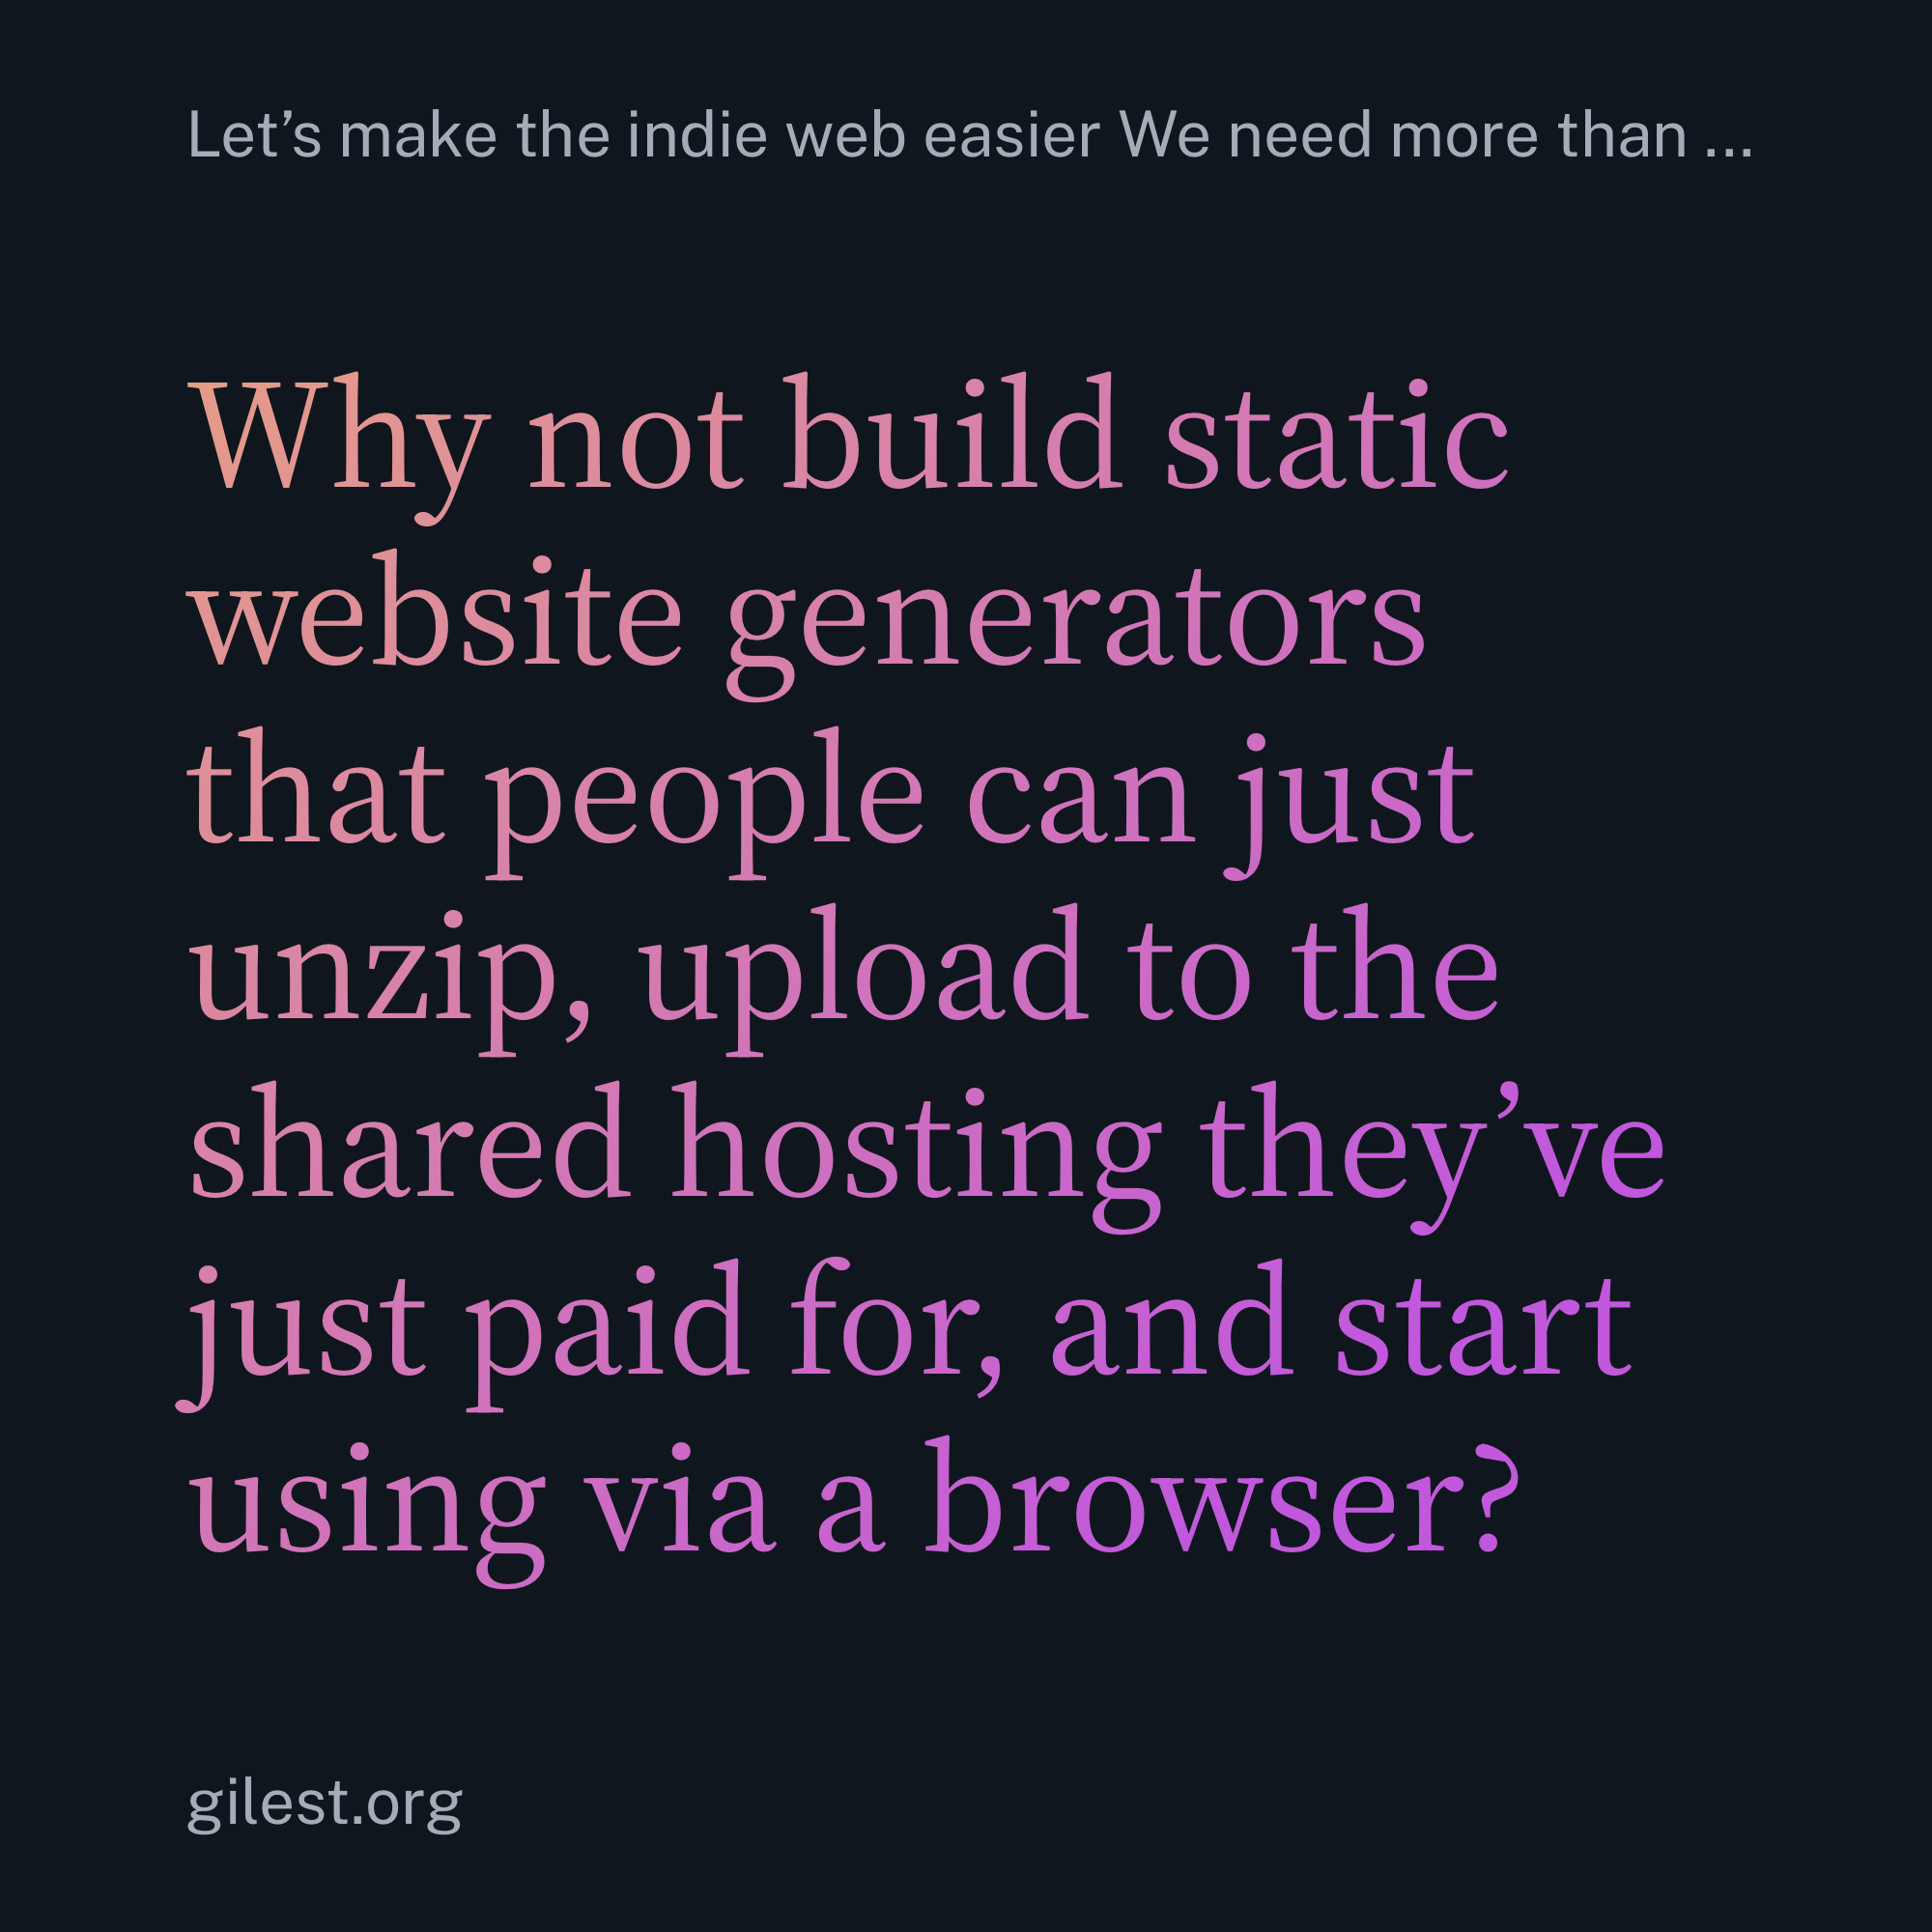 Why not build static website generators that people can just unzip, upload to the shared hosting they’ve just paid for, and start using via a browser?